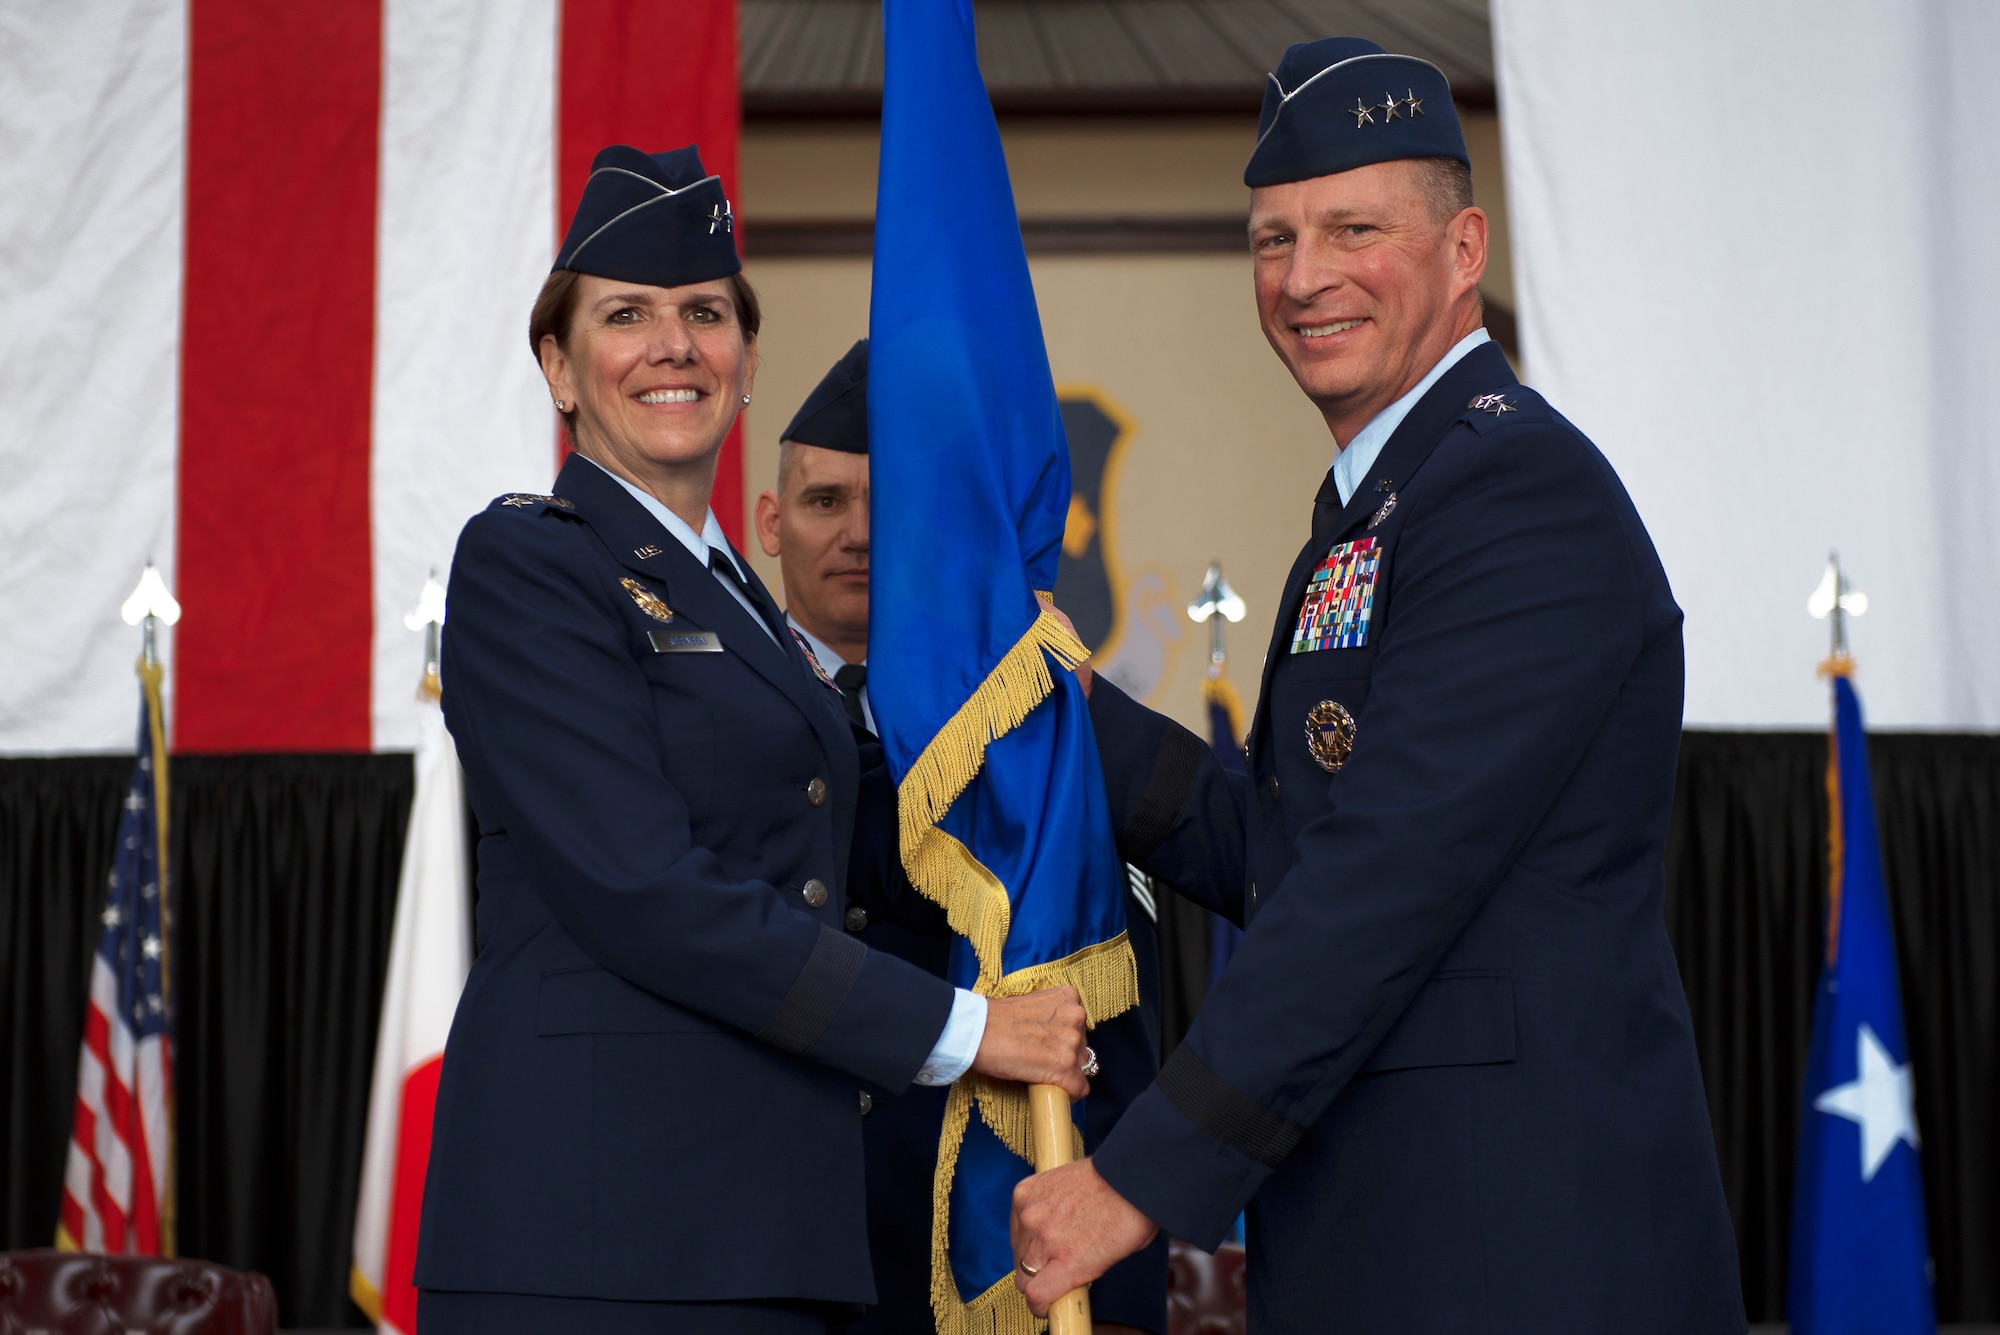 Gen. Lori J. Robinson, the Pacific Air Forces commander, passes the U.S. Forces Japan guidon to the new U.S. Forces Japan and 5th Air Force Commander Lt. Gen. John L. Dolan, during a change of command ceremony June 5, 2015, at Yokota Air Base, Japan. The passing of the guidon marks the beginning of Dolan's tour as the commander of the USFJ and 5th Air Force. (U.S. Air Force photo/Airman 1st Class Delano Scott) 